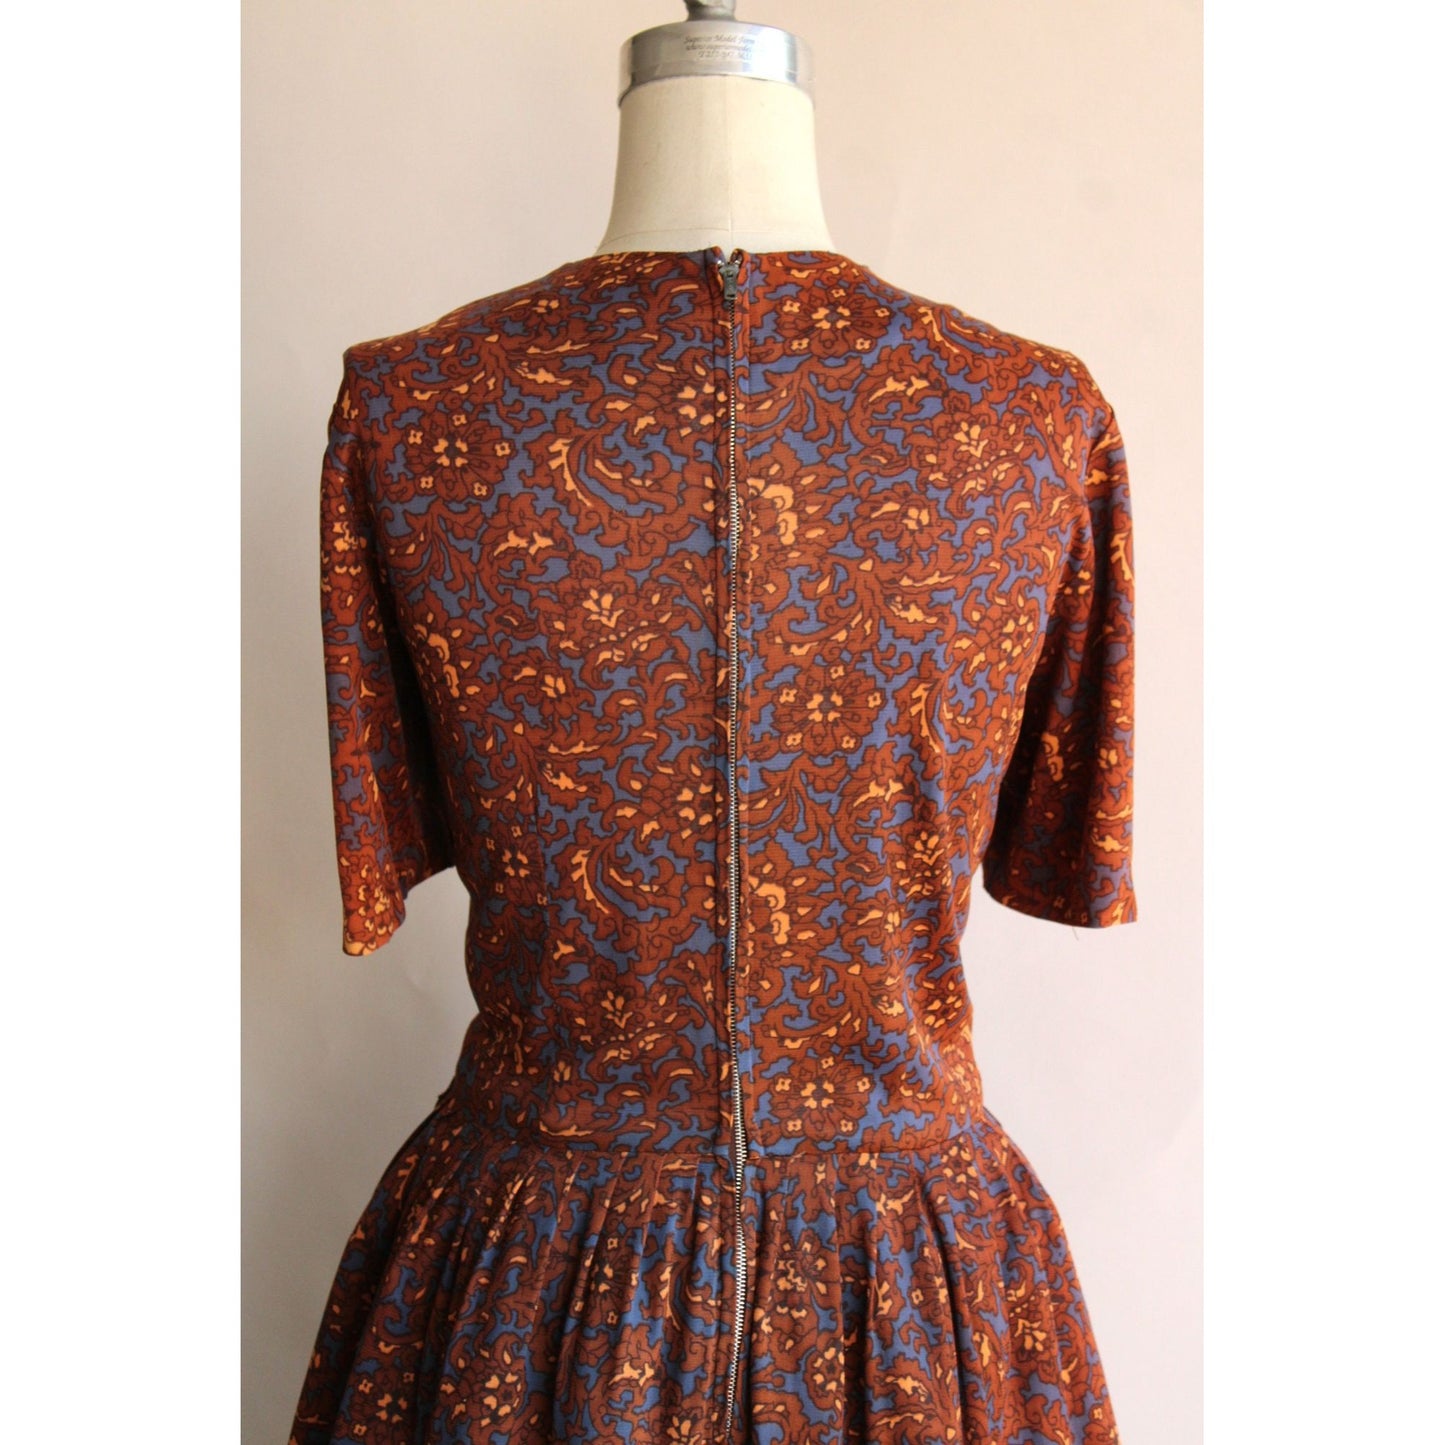 Vintage 1950s 1960s Sears Dress in a Nylon Floral Print